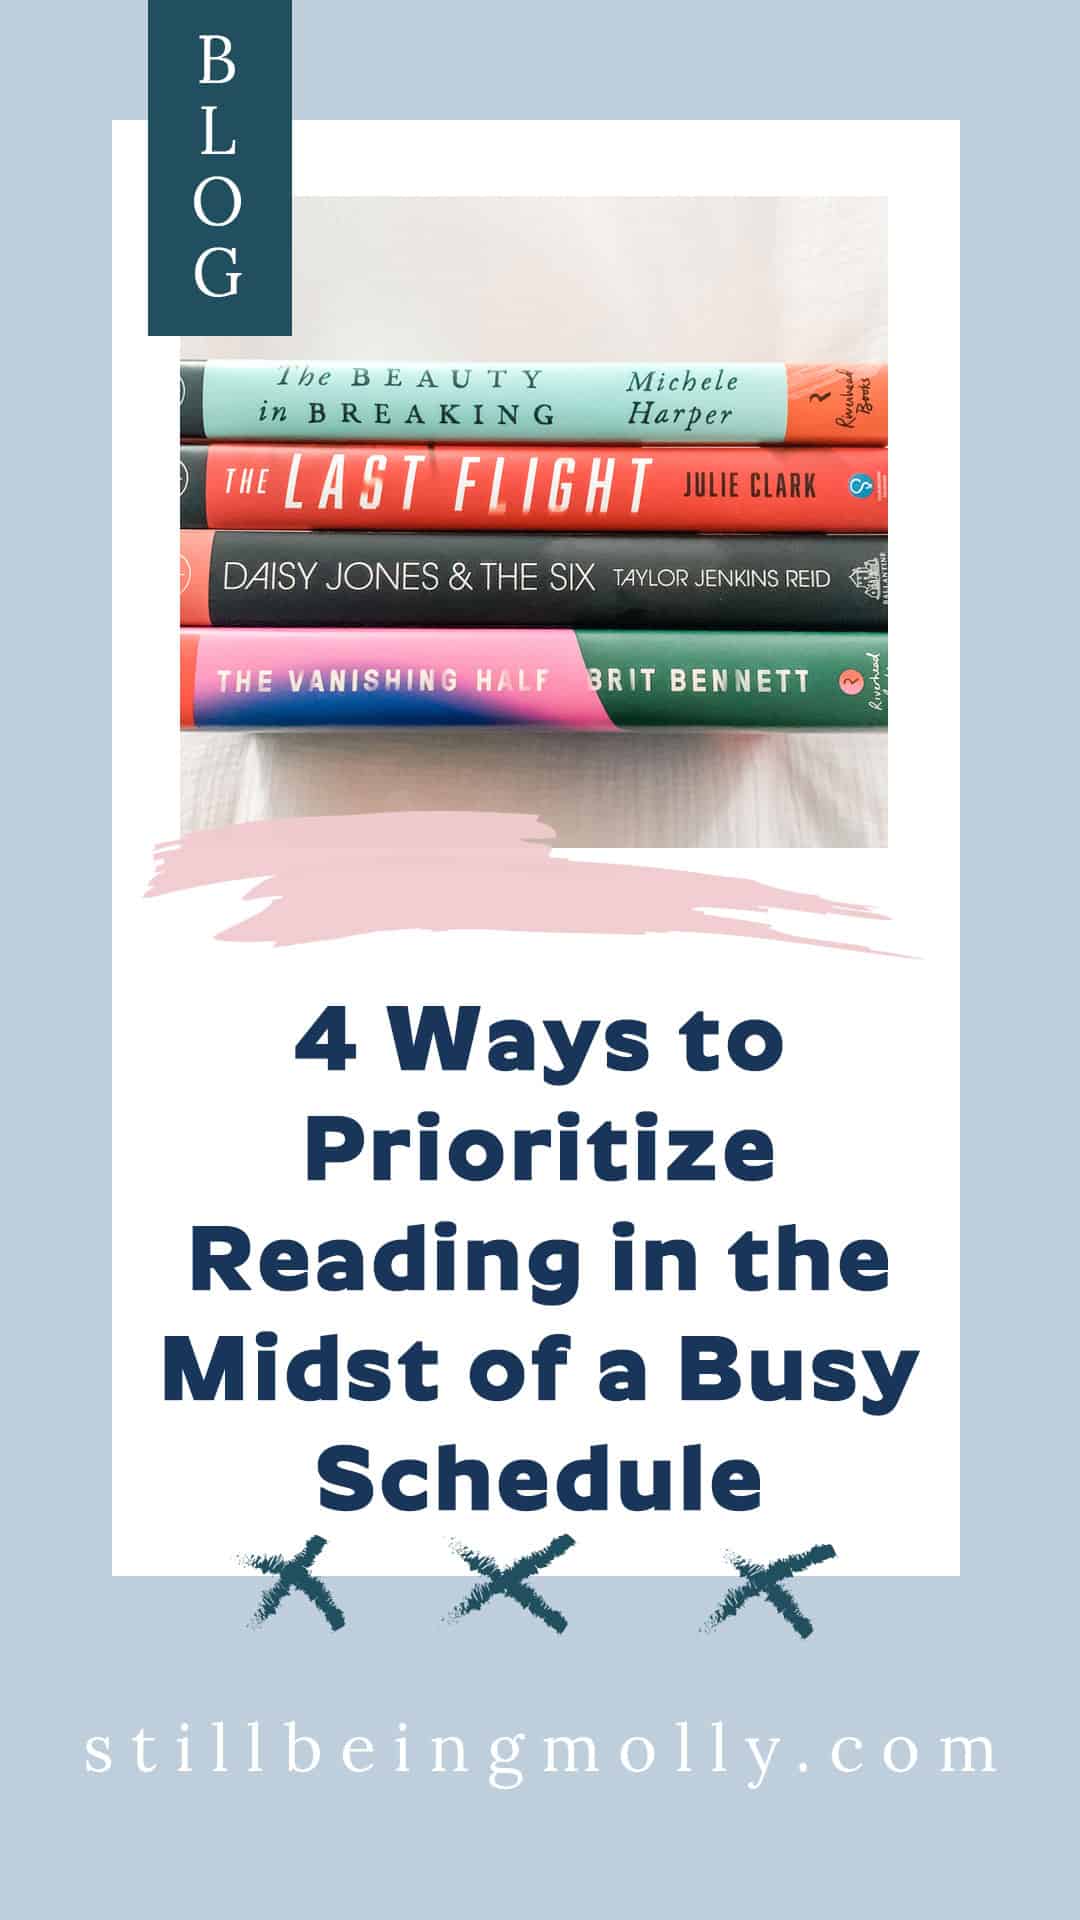 4 Ways to Prioritize Reading in the Midst of a Busy Schedule